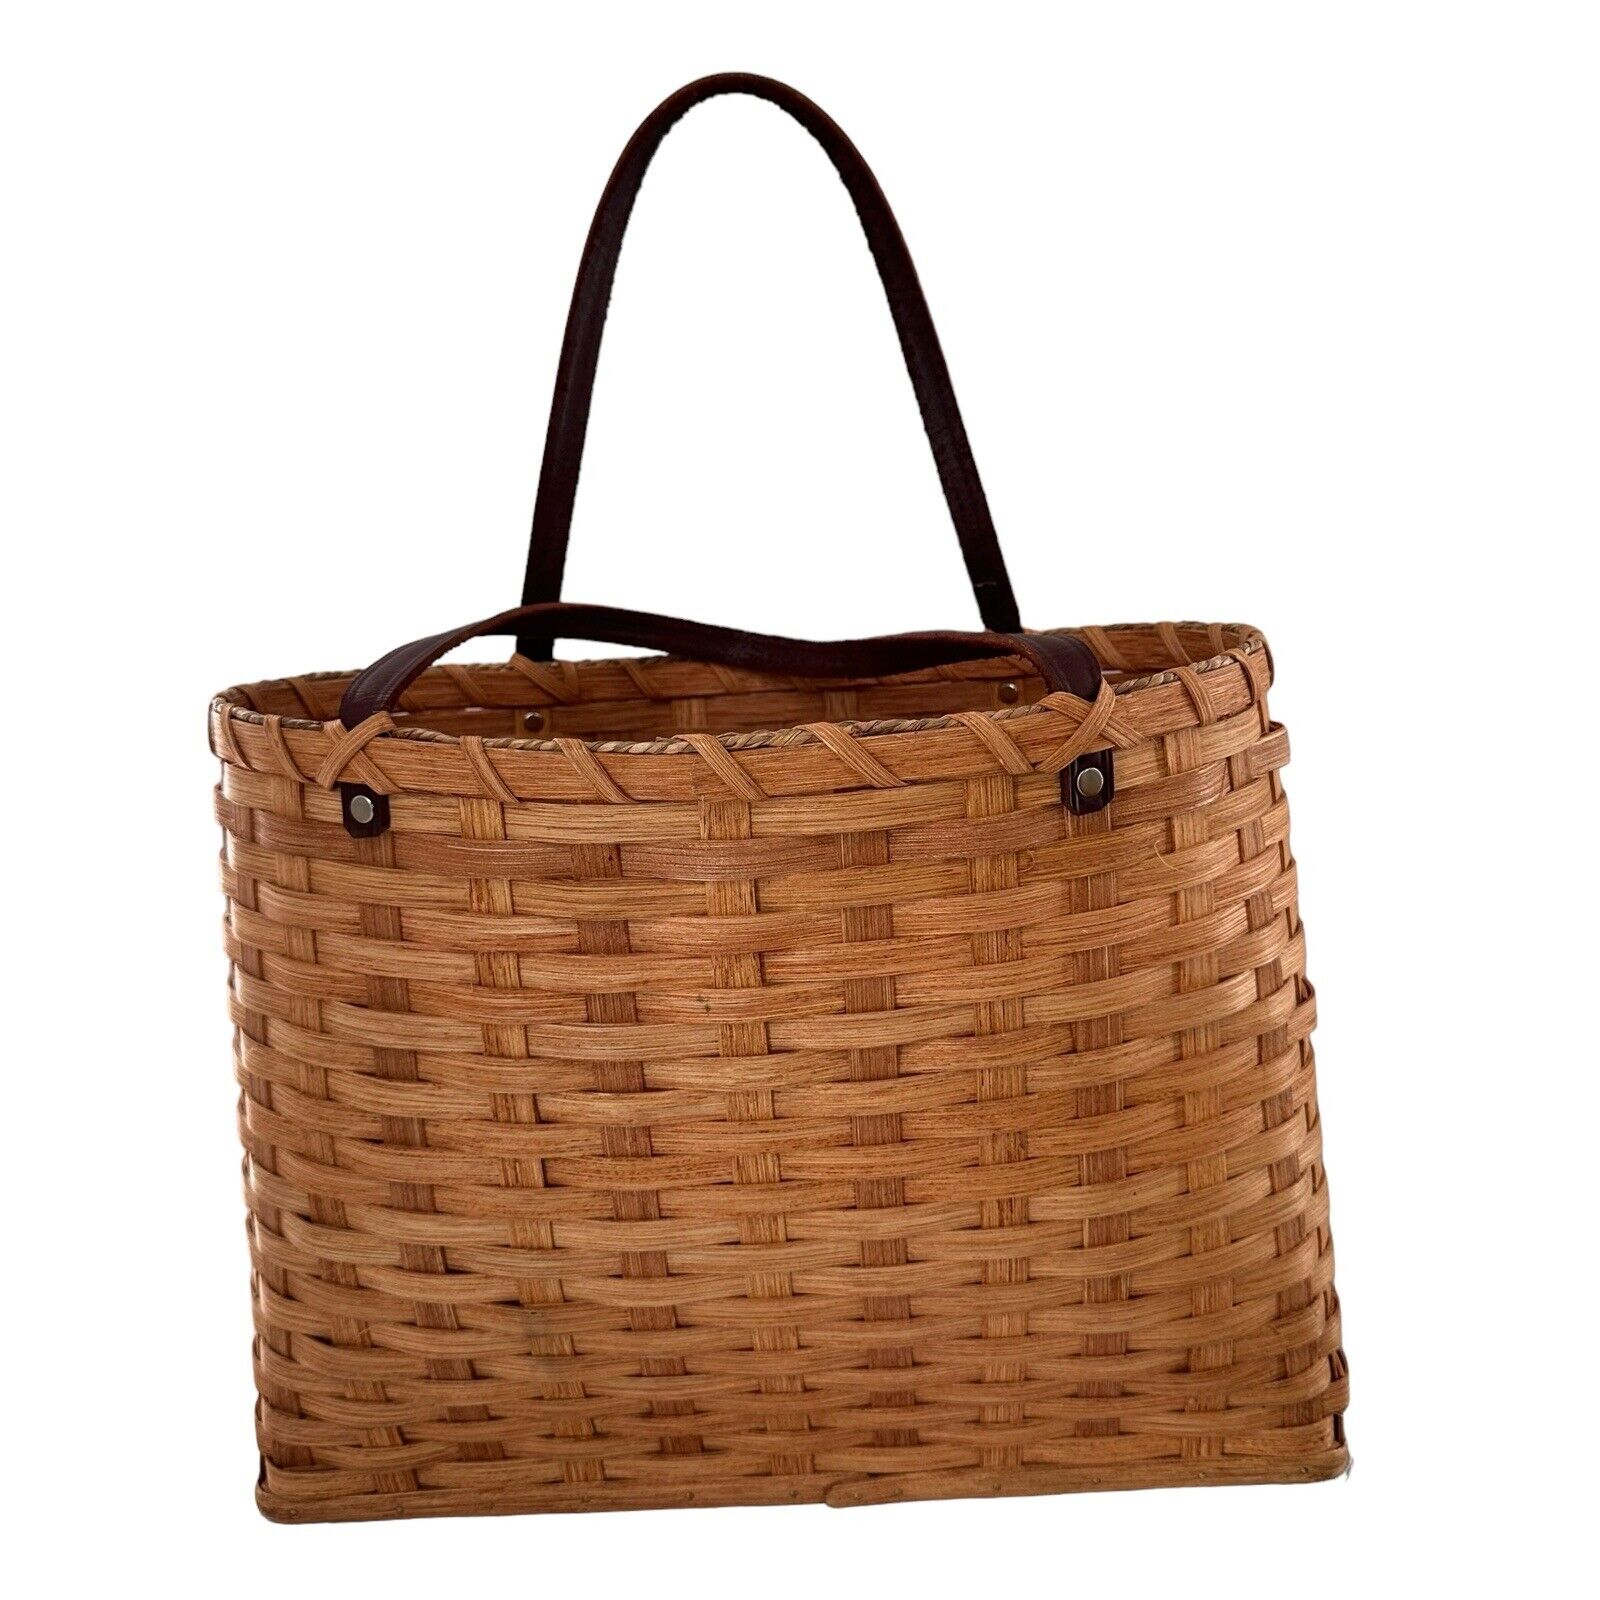 Handwoven Amish Egg Gathering Basket Signed Farmhouse Tote Farmers Market Wicker